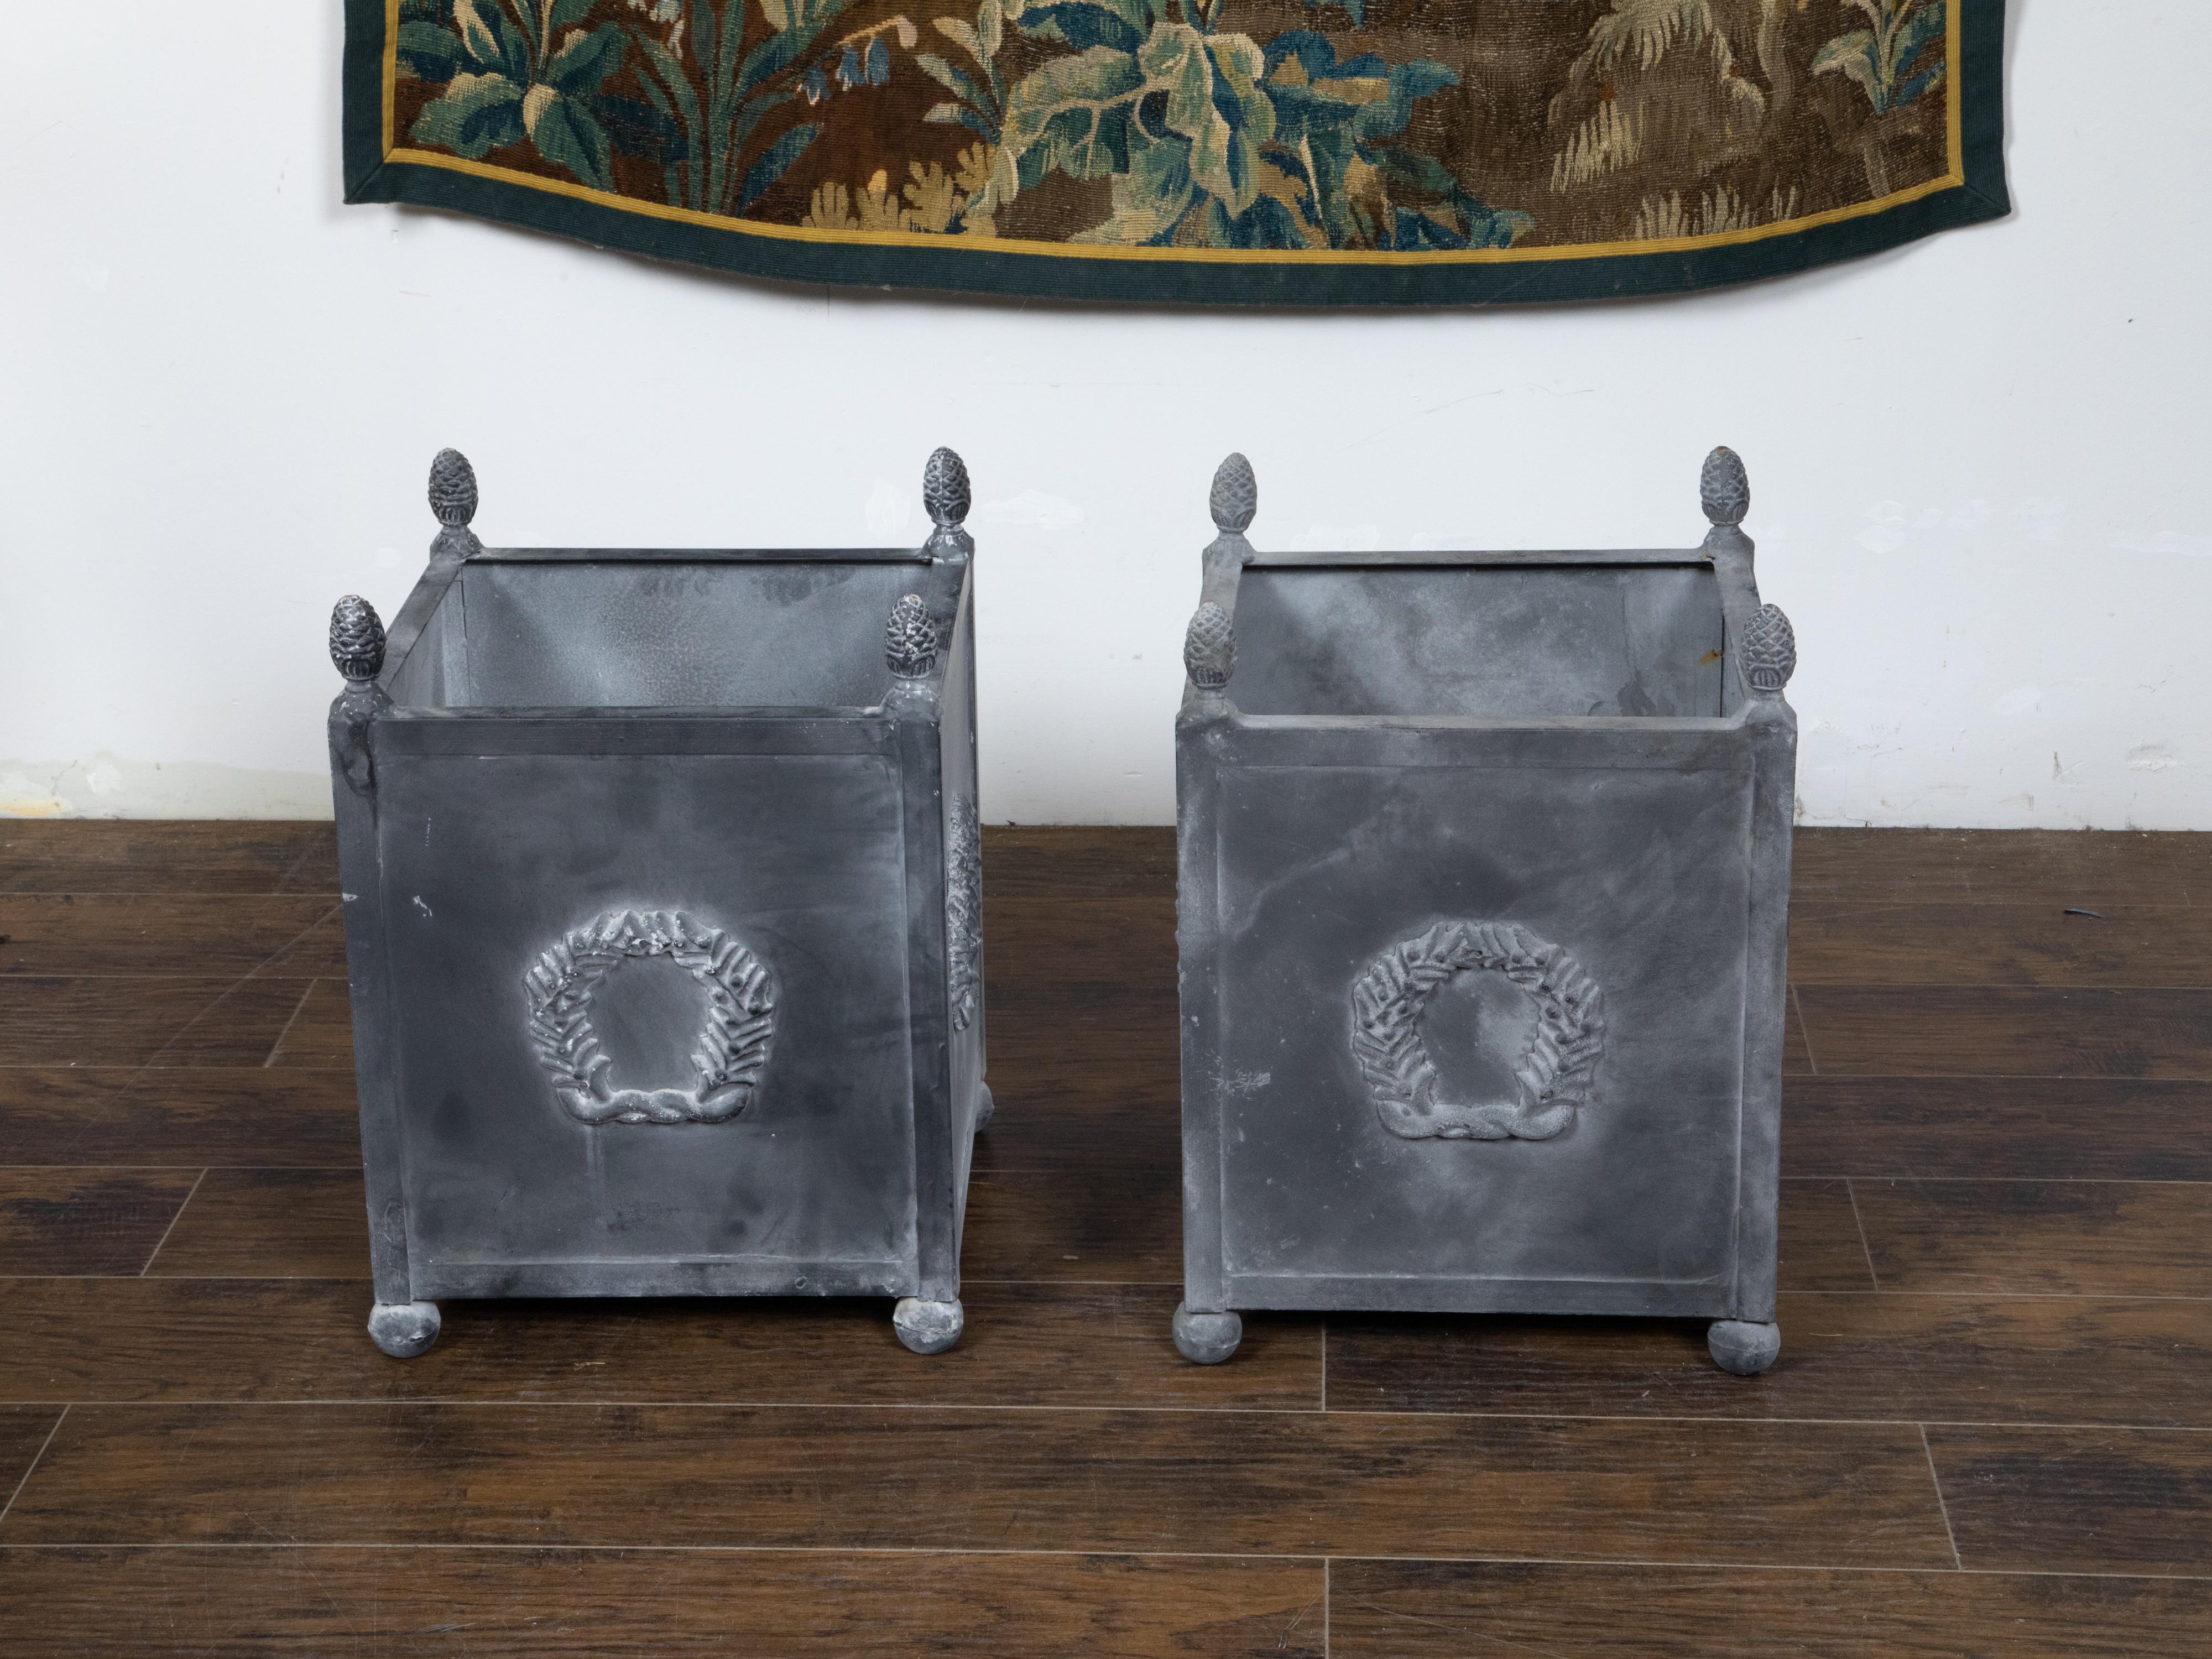 A pair of vintage American Neoclassical inspired metal cache pot planters from the 20th century with grey patinated color, laurel wreath motifs, acorns and petite ball feet. Made in the USA during the 20th century, each of this pair of metal